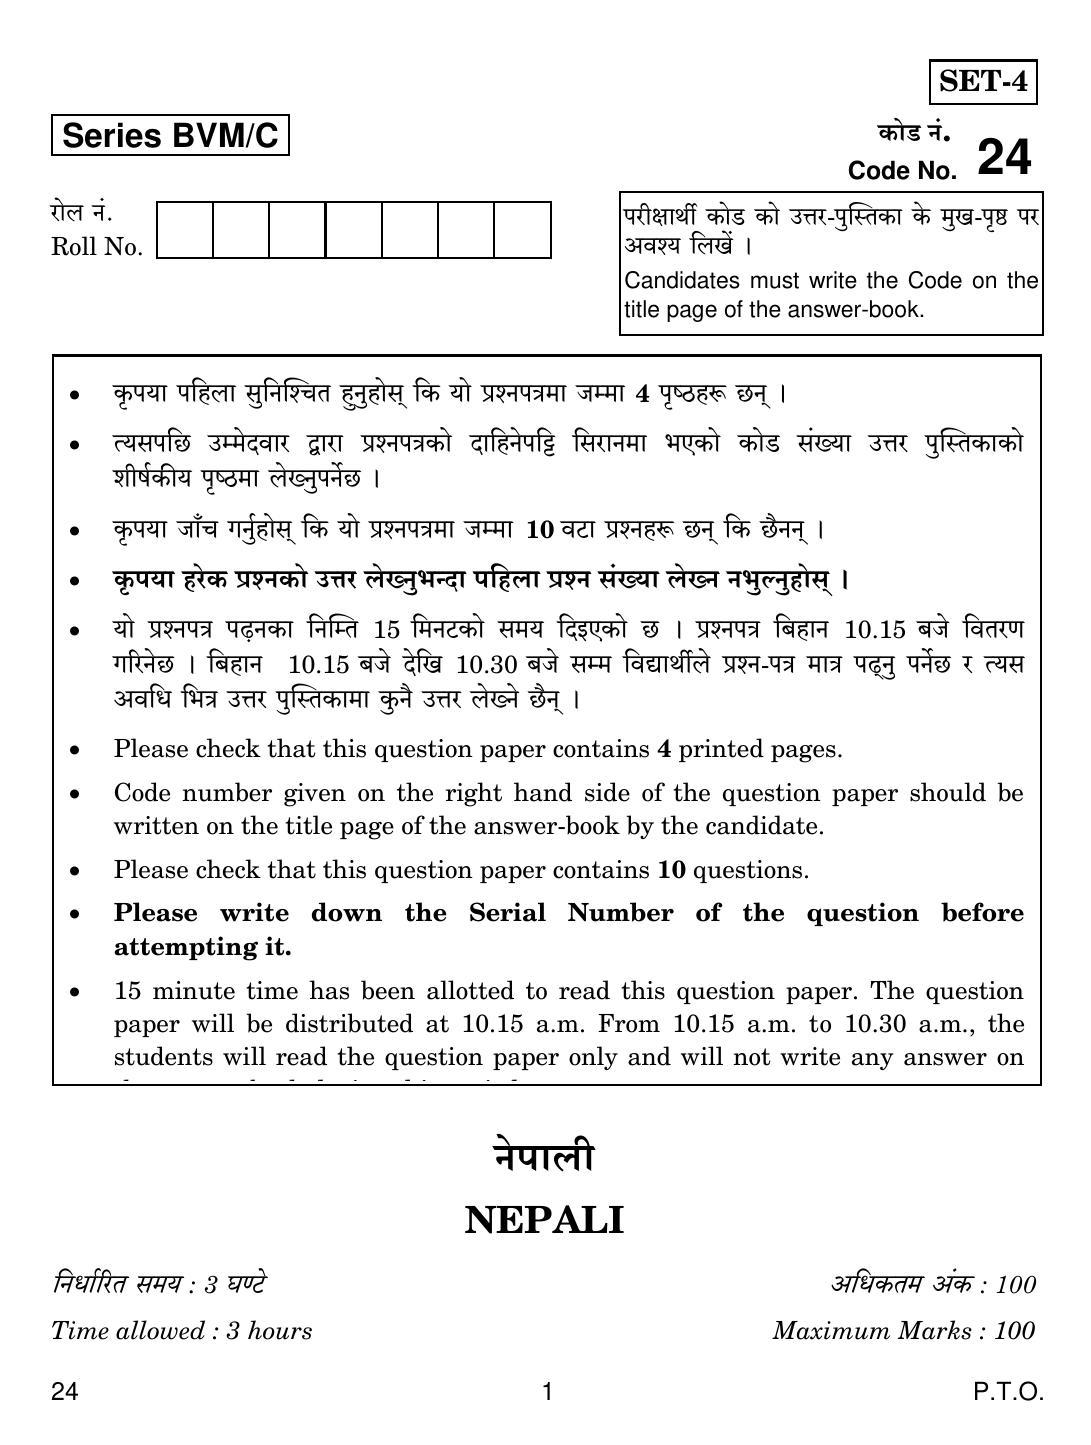 CBSE Class 12 24 NEPALI 2019 Compartment Question Paper - Page 1